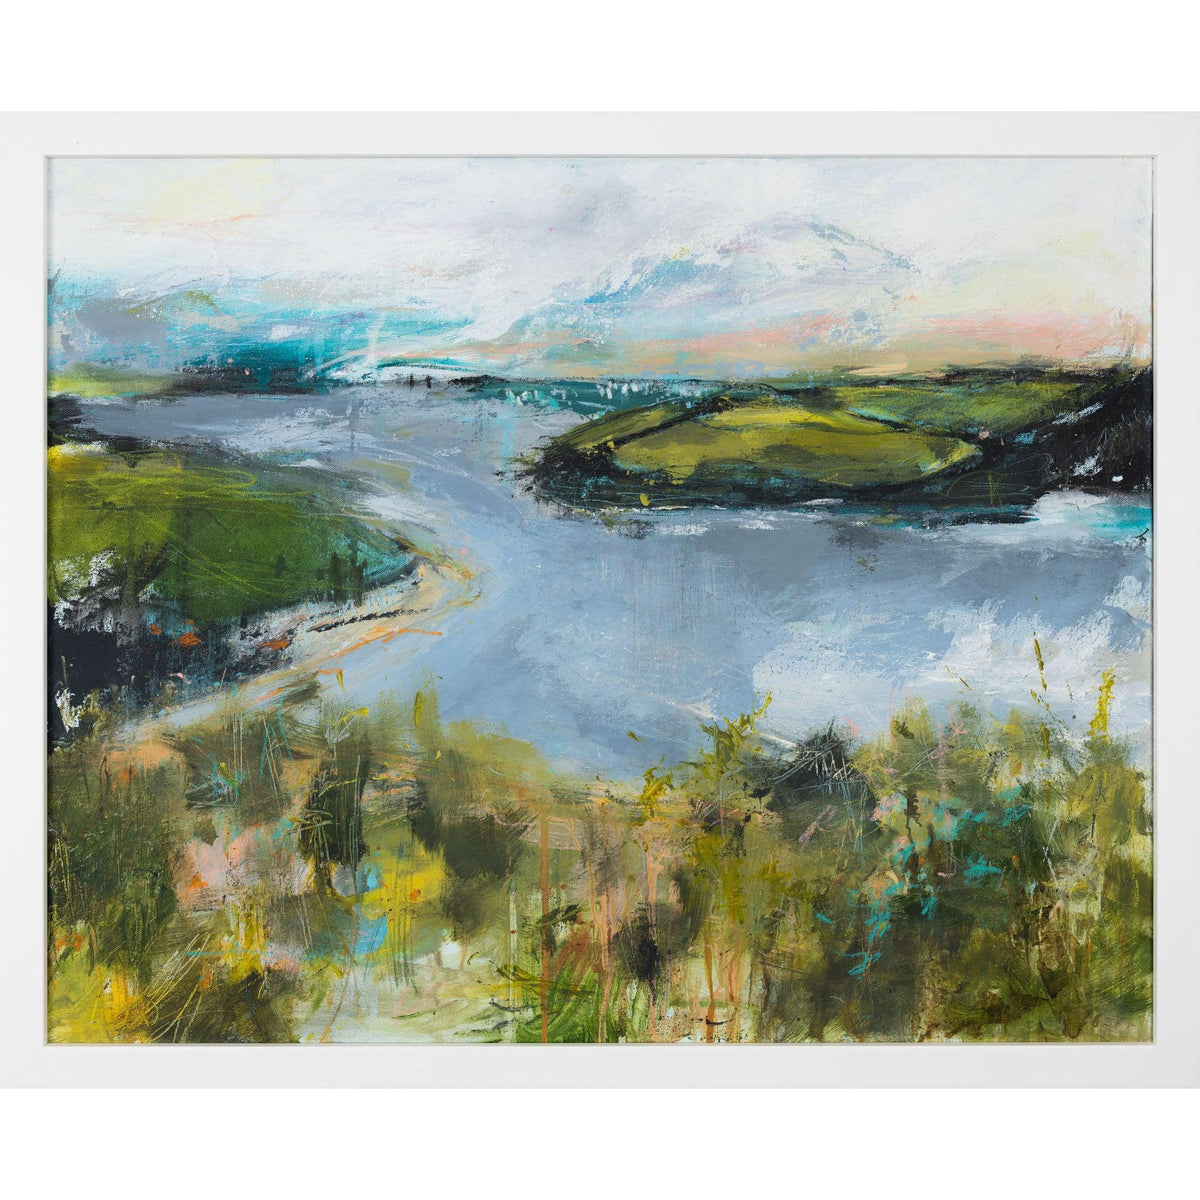 &#39;Above Daymer&#39; mixed media original by Sarah Pooley, available at Padstow Gallery, Cornwall.